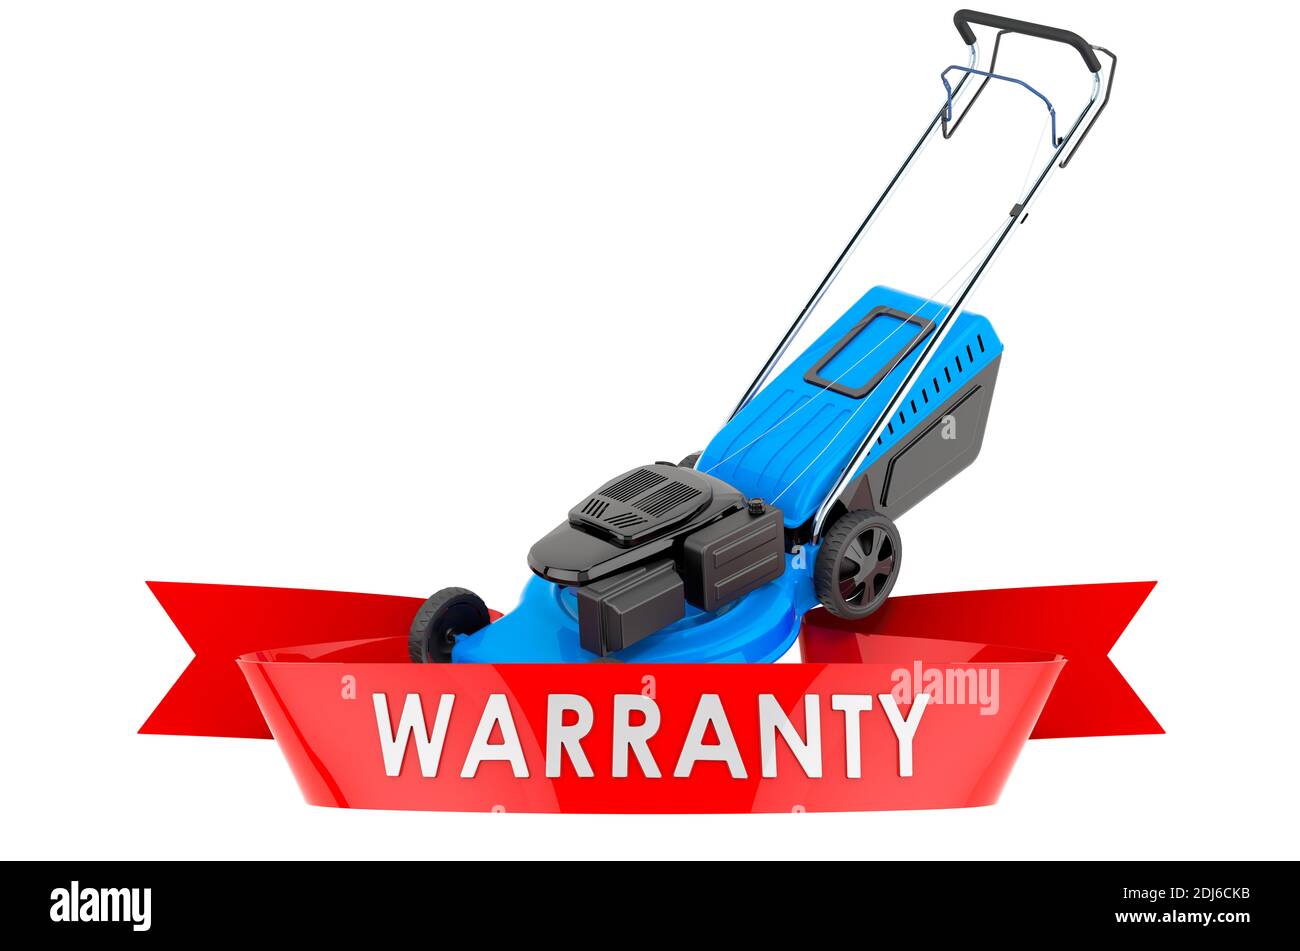 lawn-mower-warranty-concept-3d-rendering-isolated-on-white-background